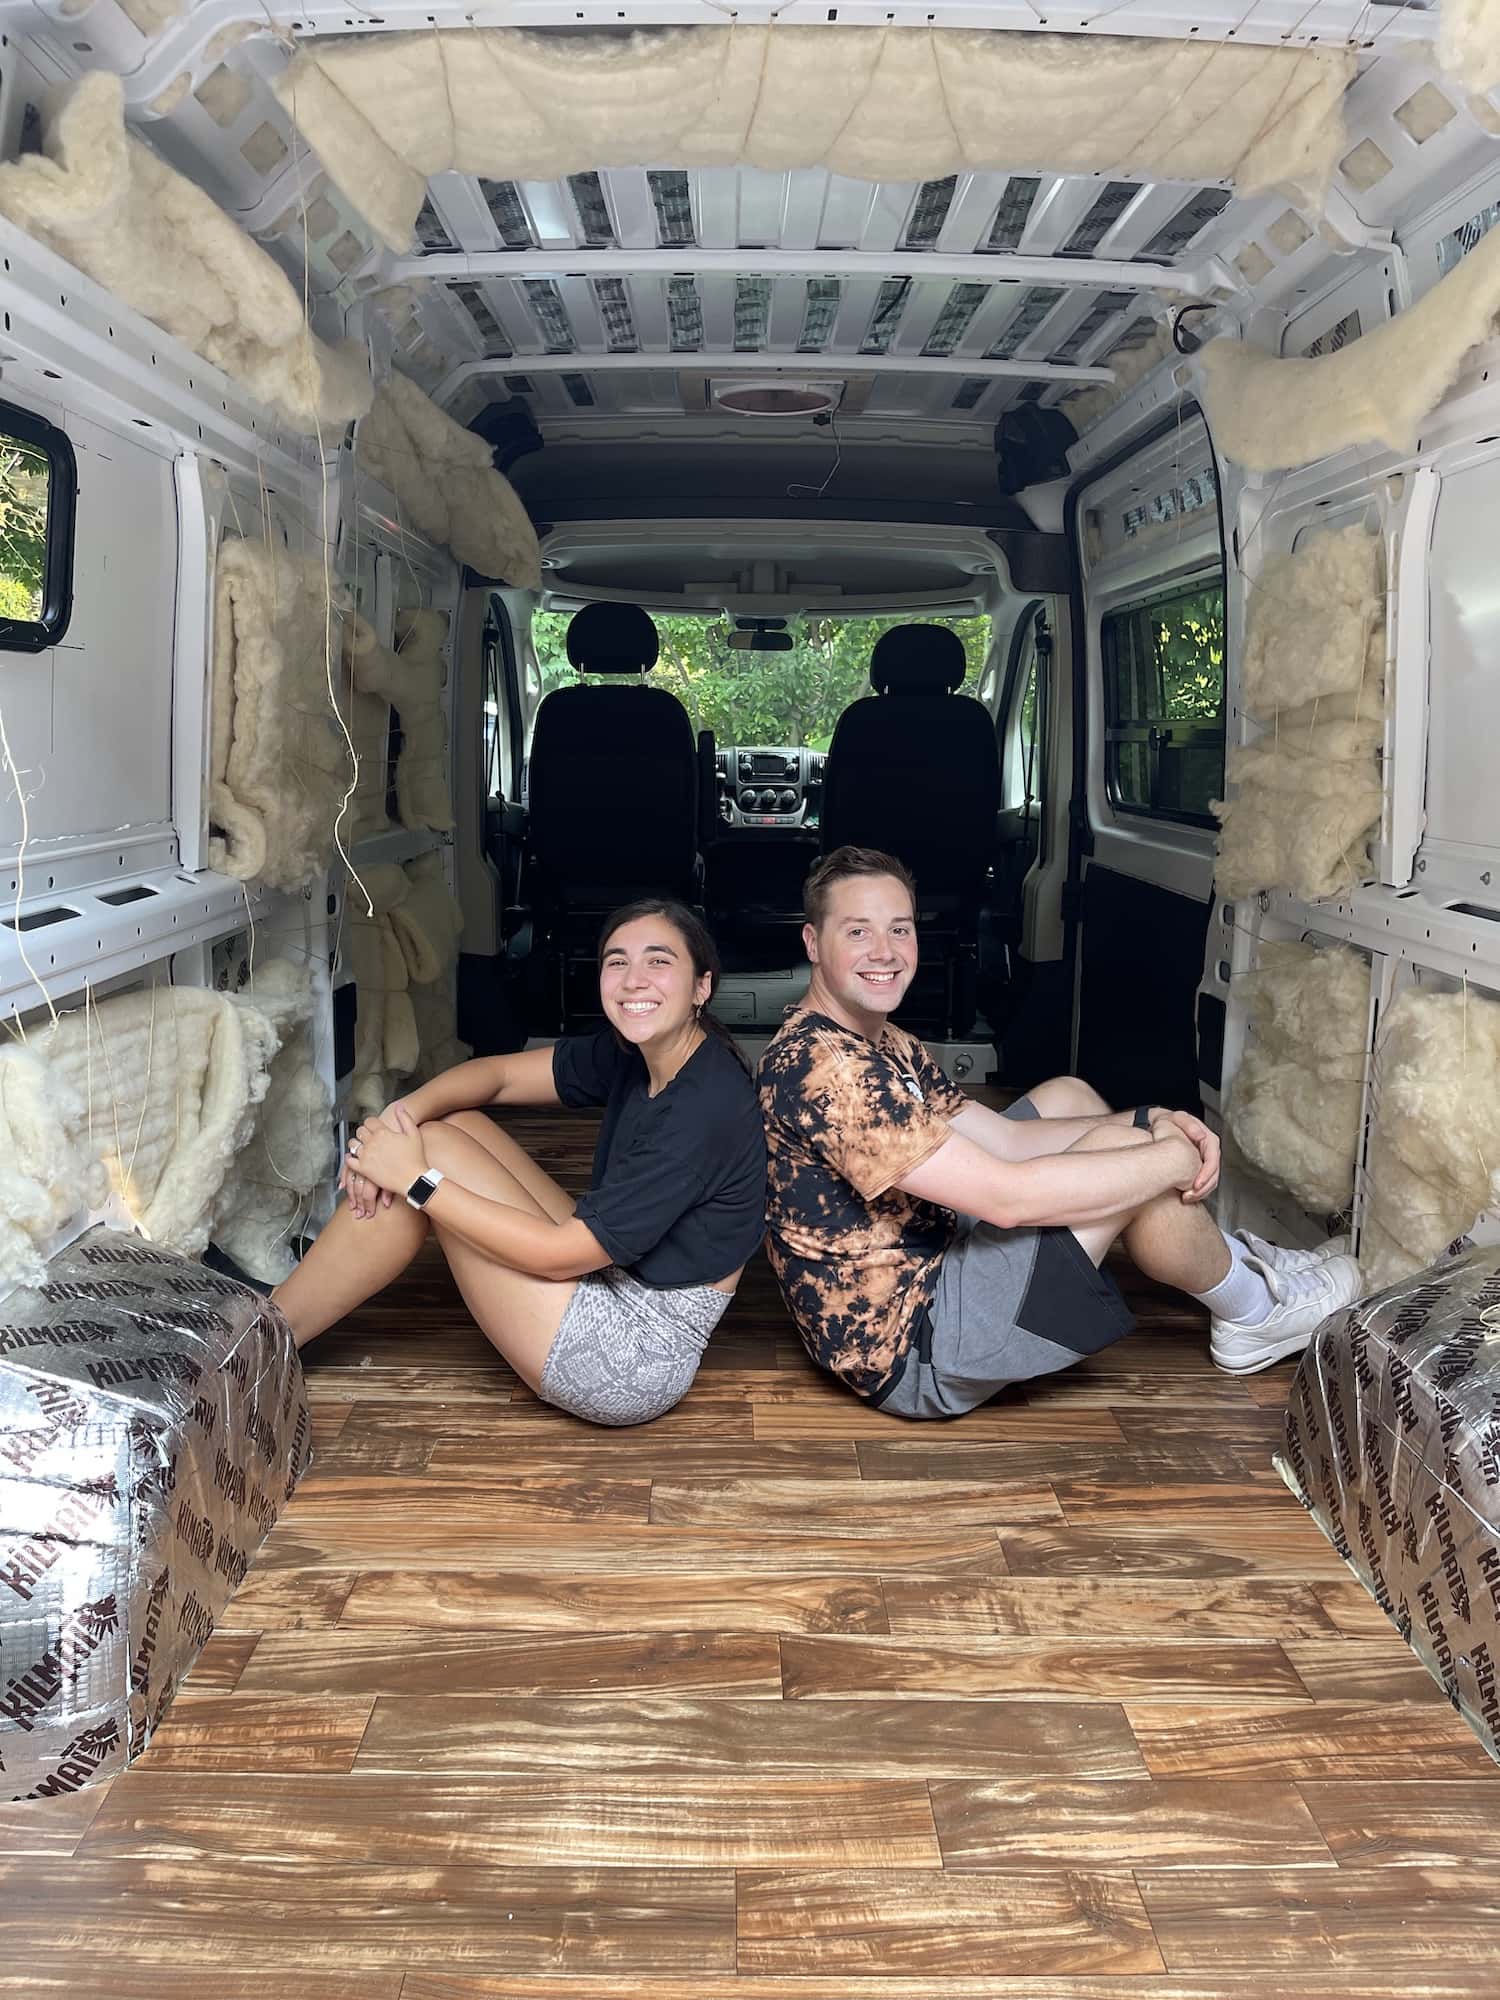 Van Floor Insulation cover. Dylan and Lita sit on it